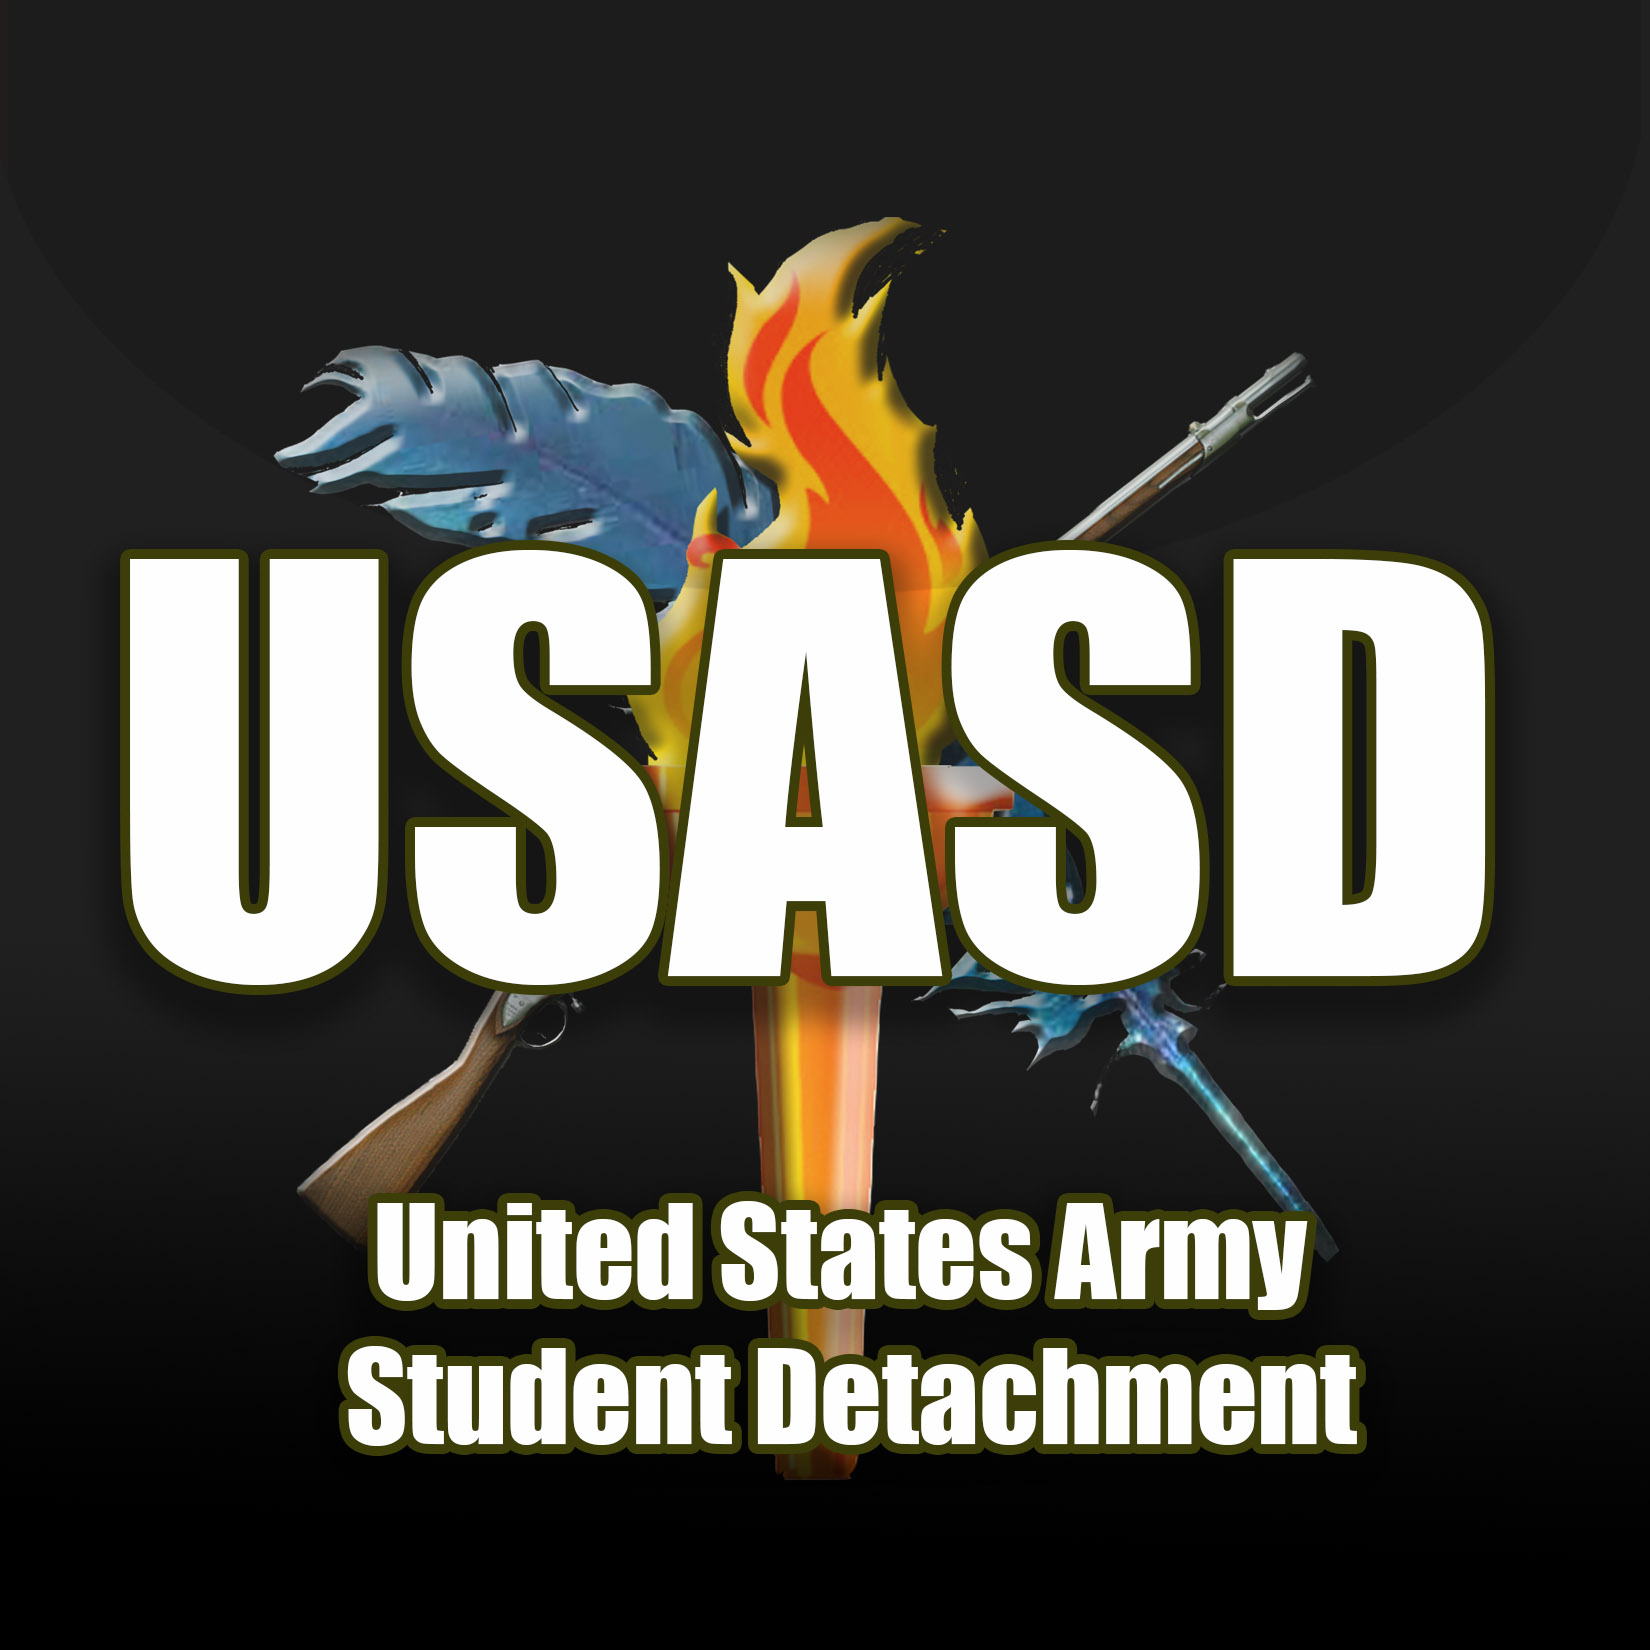 United States Army Student Detachment Course